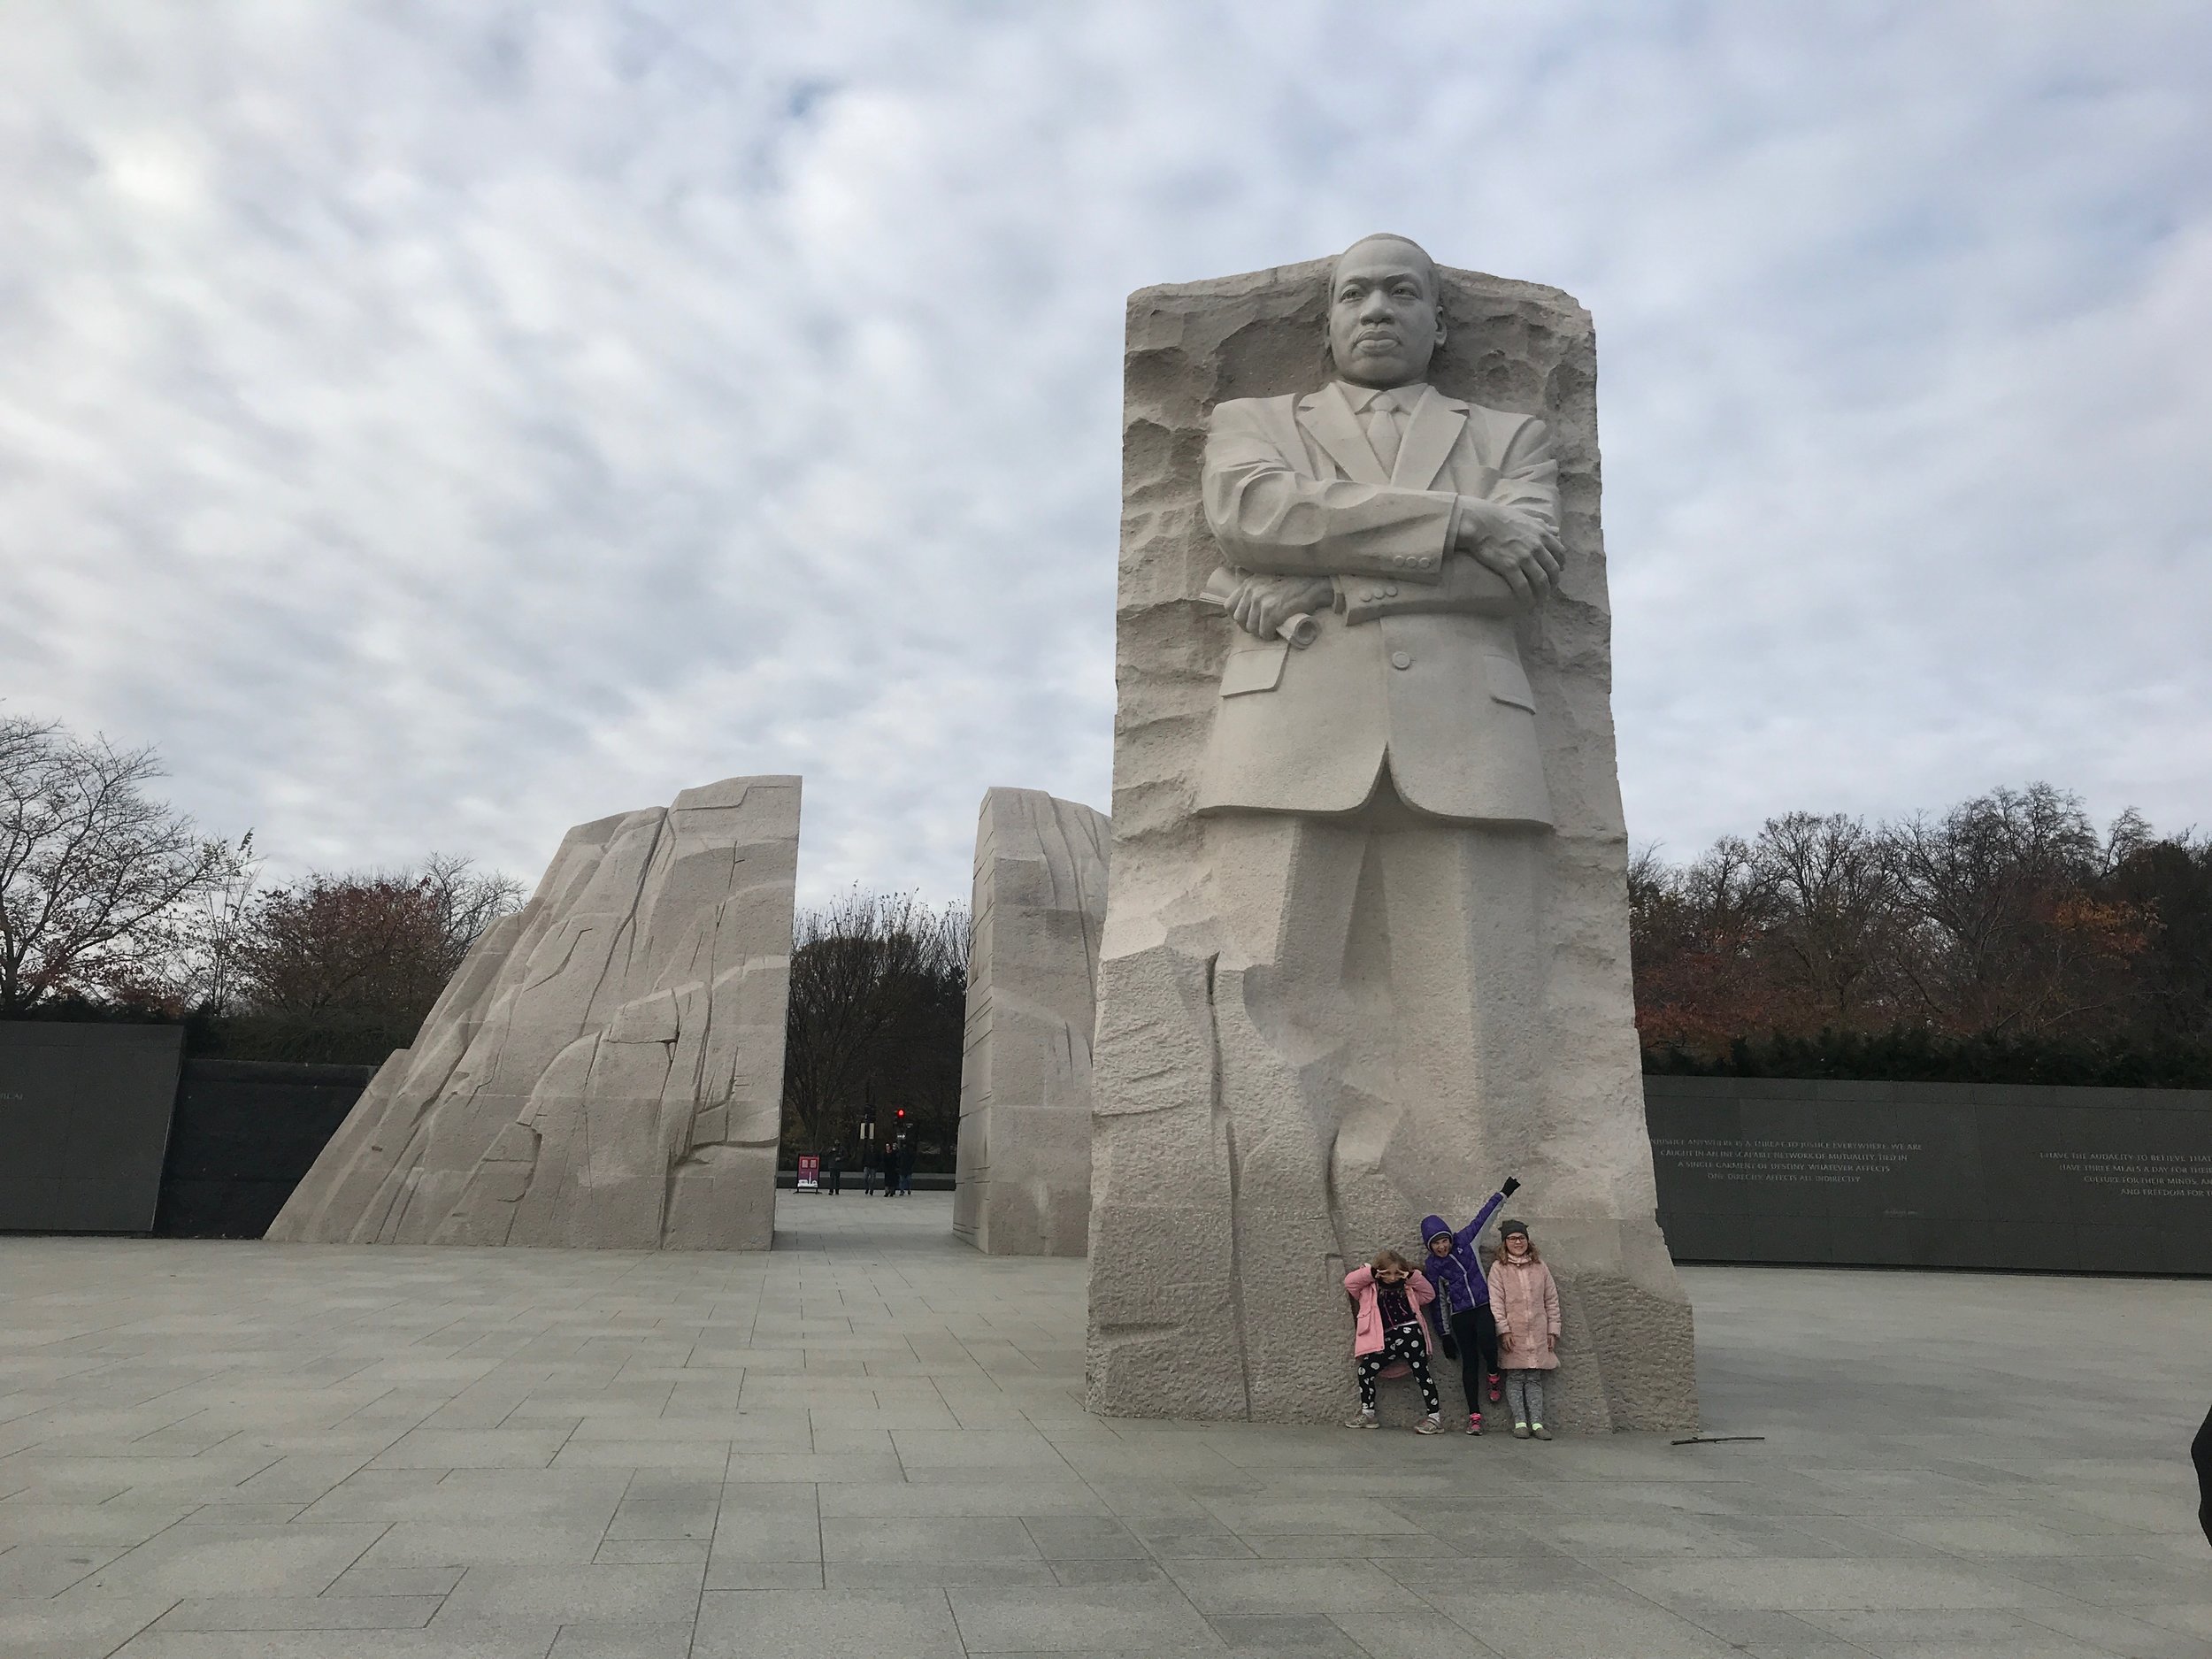  The memorial to Dr. Martin Luther King Jr. on the National Mall in Washington, DC.      